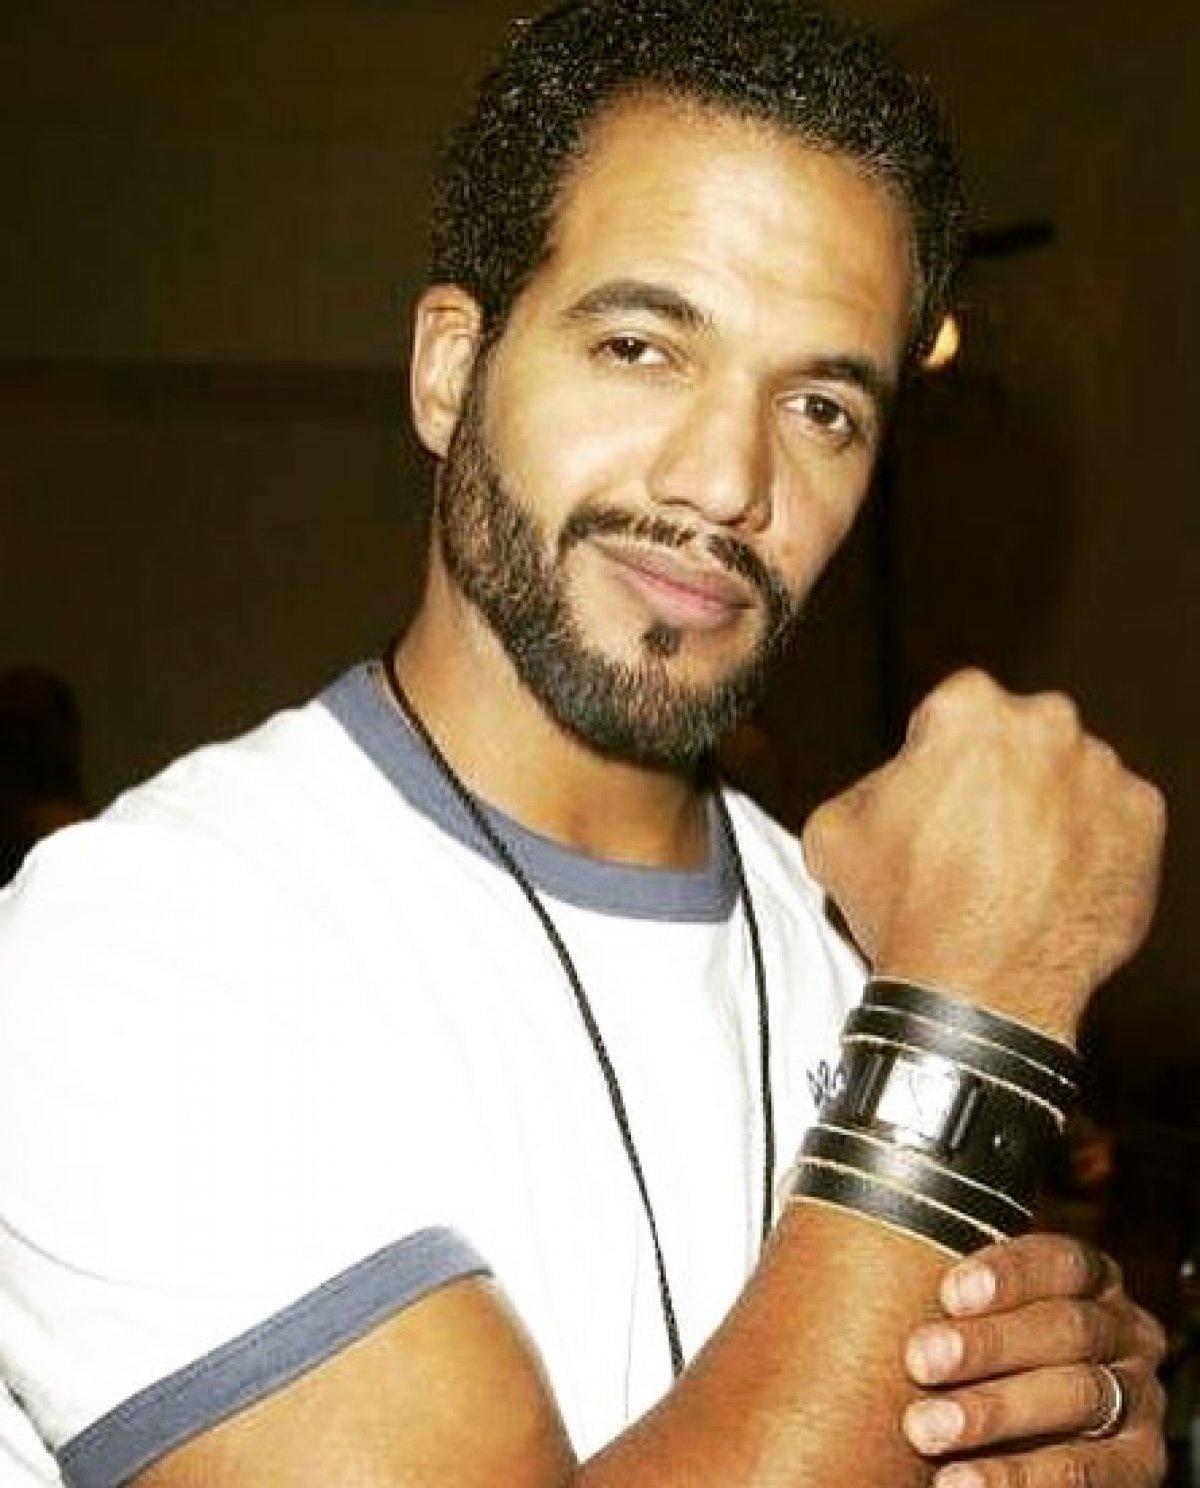 The Young and the Restless' star Kristoff St. John dead at 52